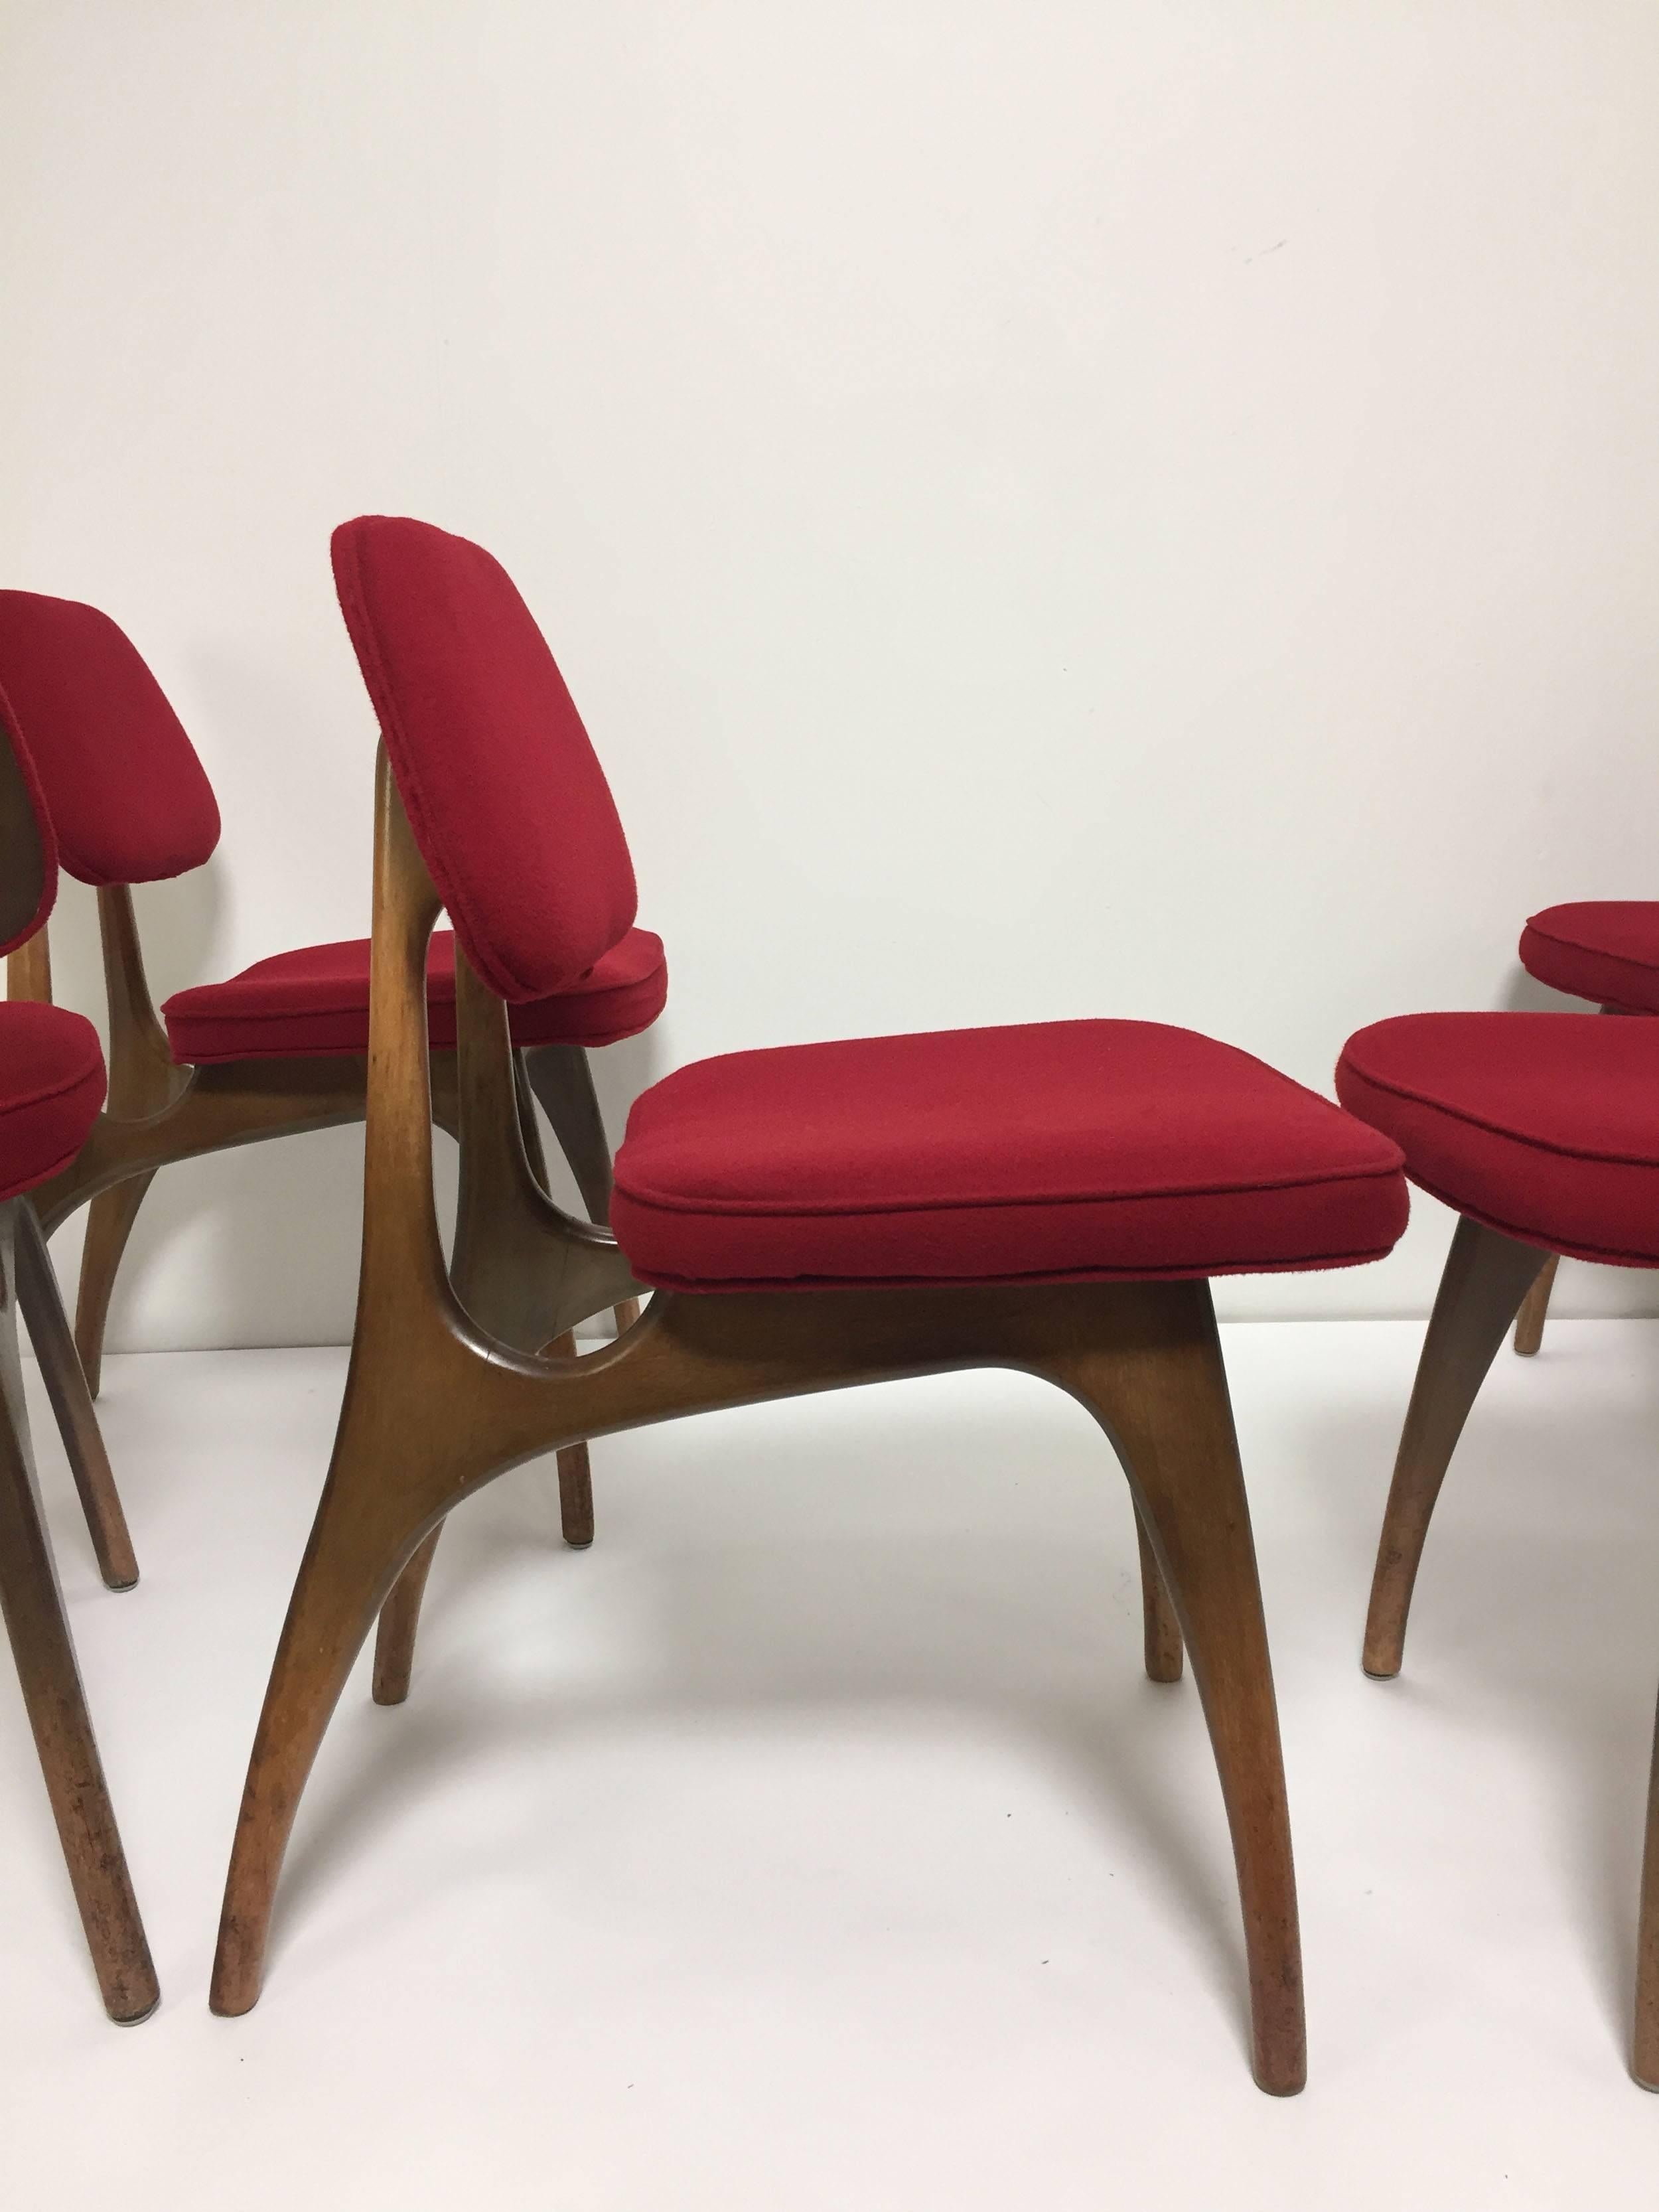 Set of six midcentury dining chairs with gracefully arched gazelle style legs.